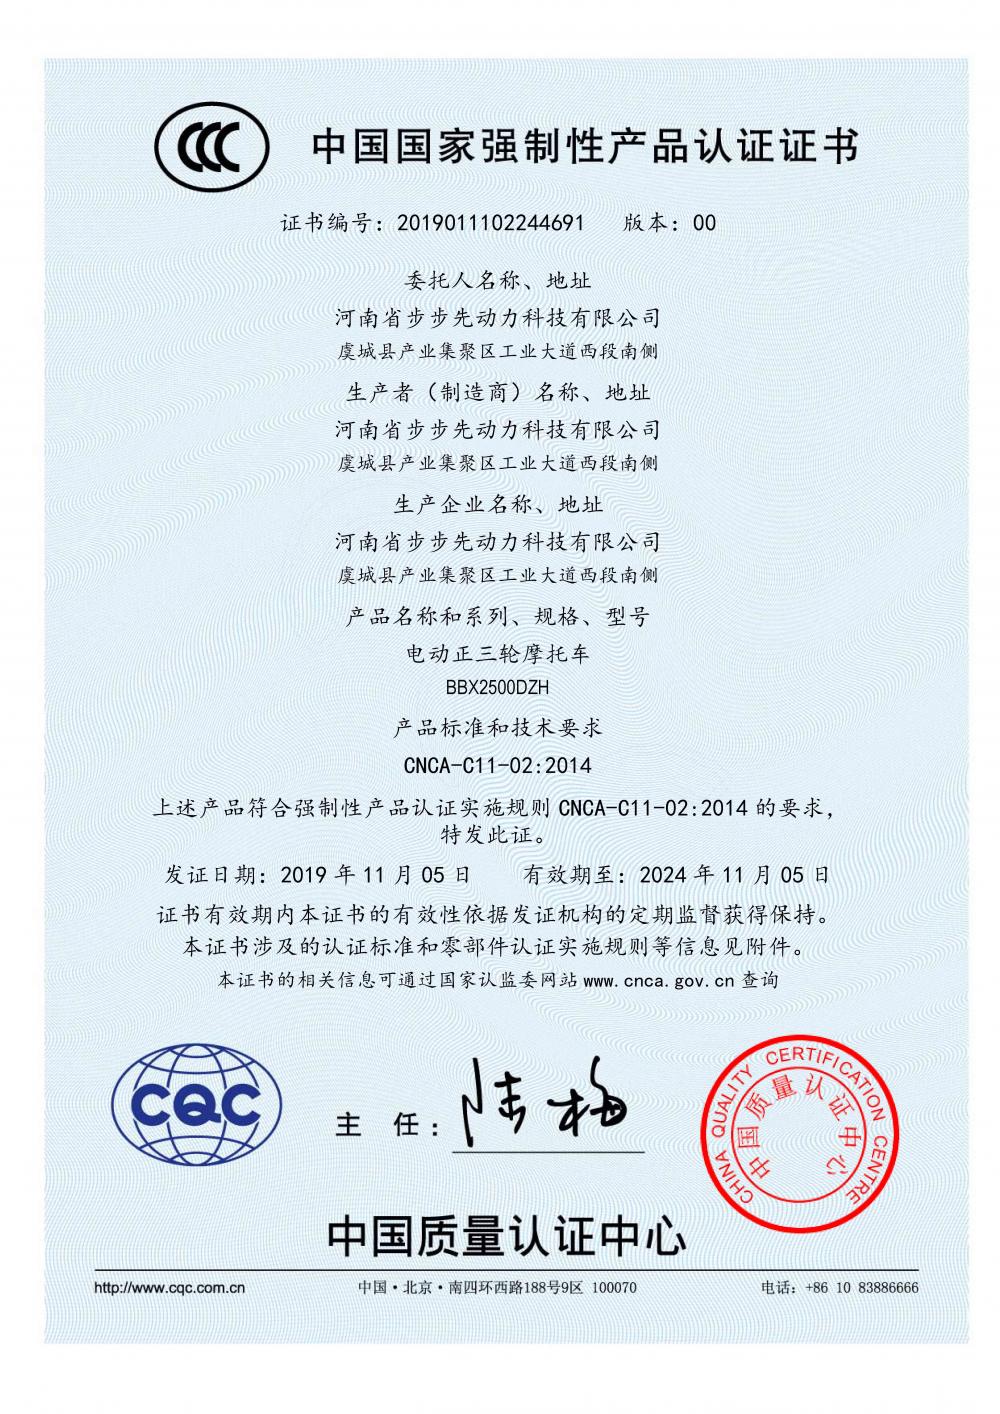 CHINA QUALITY CERTIFICATION CENTER